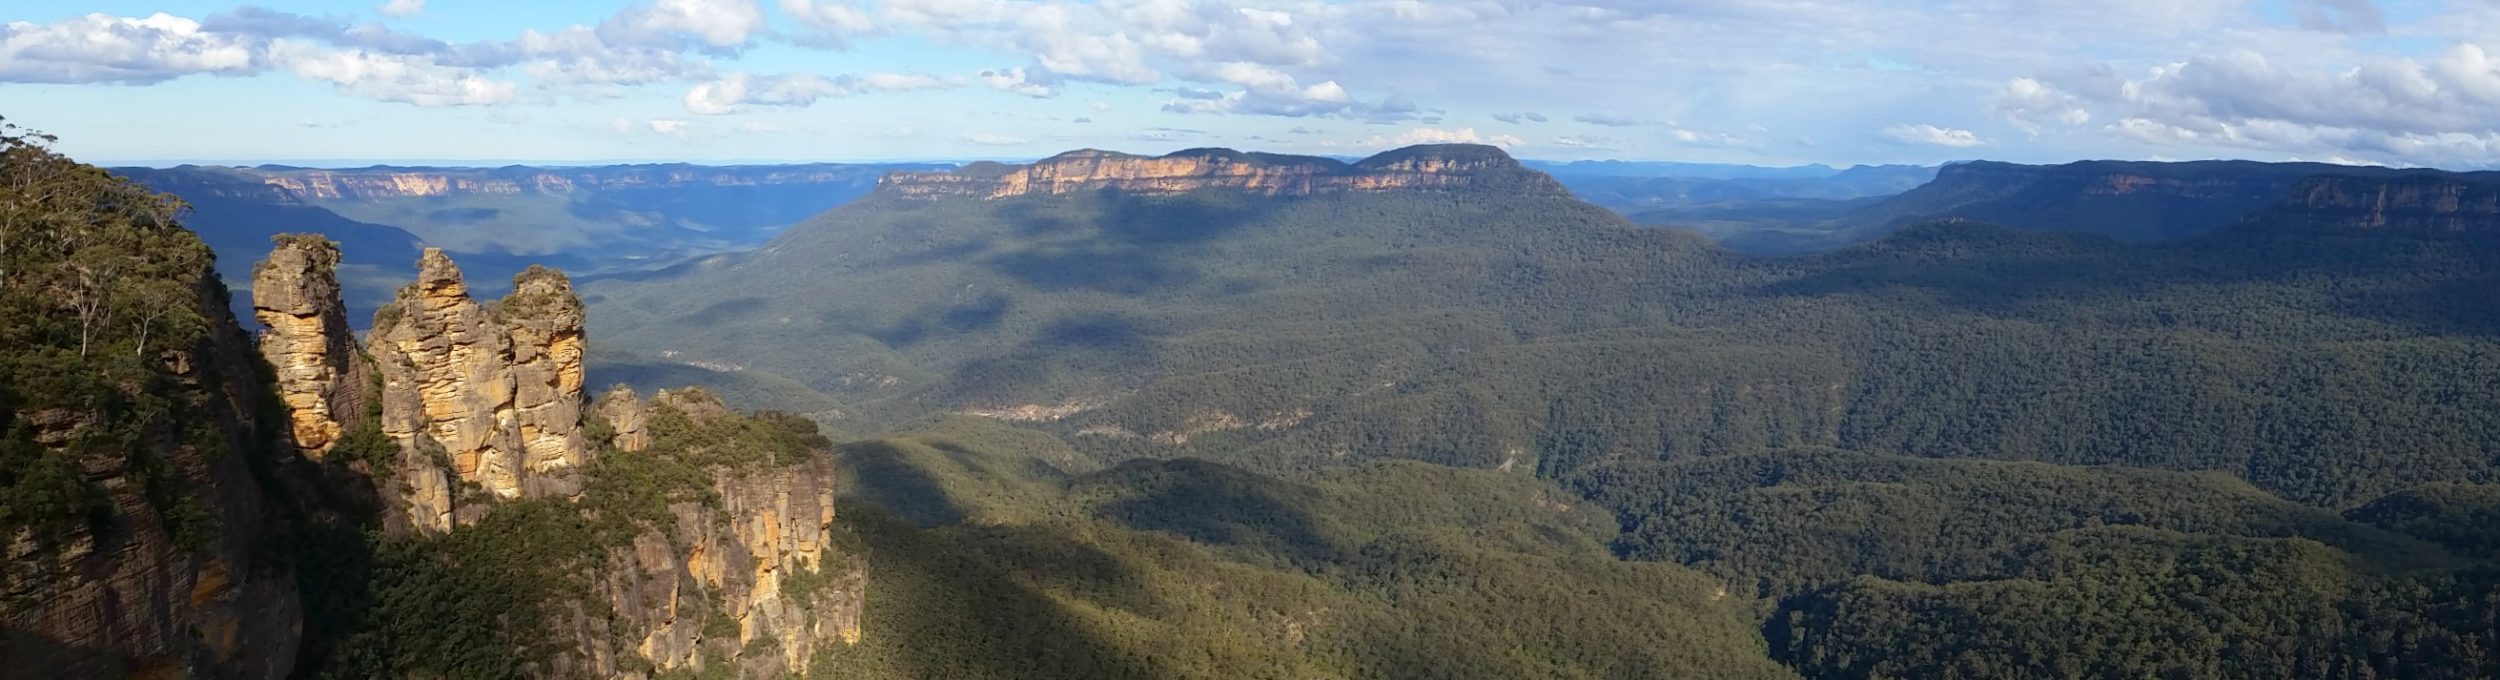 Panoramic View from Echo Point Katoomba in the Blue Mountains Australia